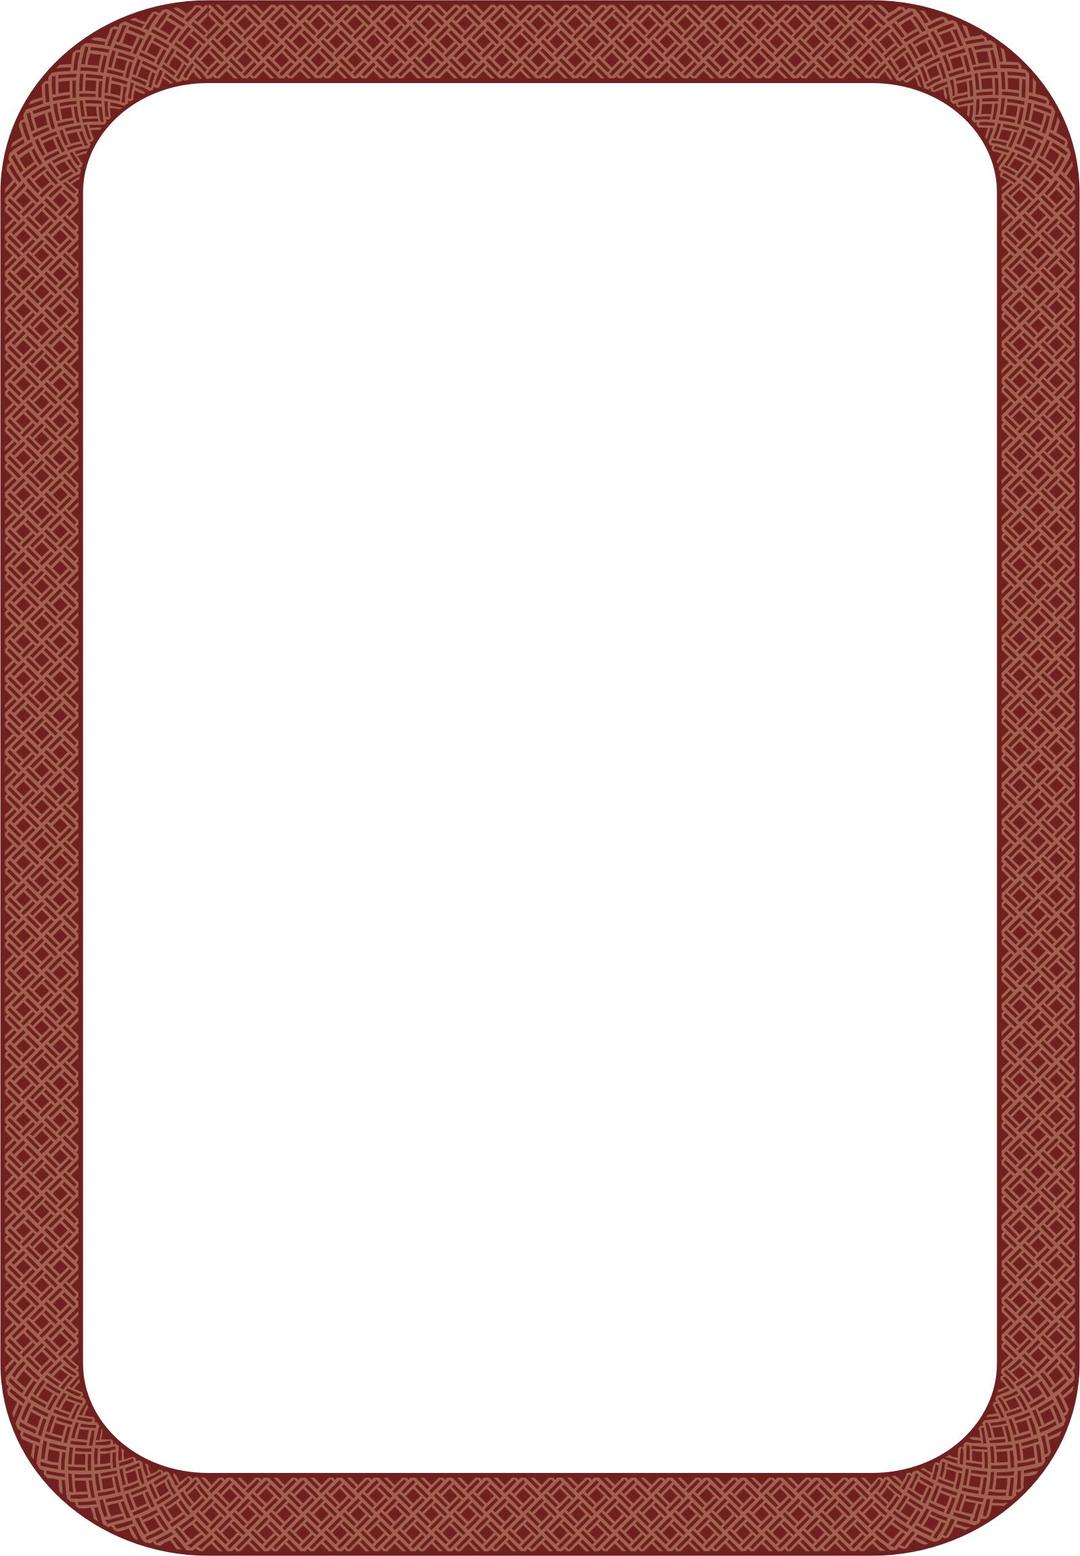 Wicker Border 4 (A4 size) png transparent